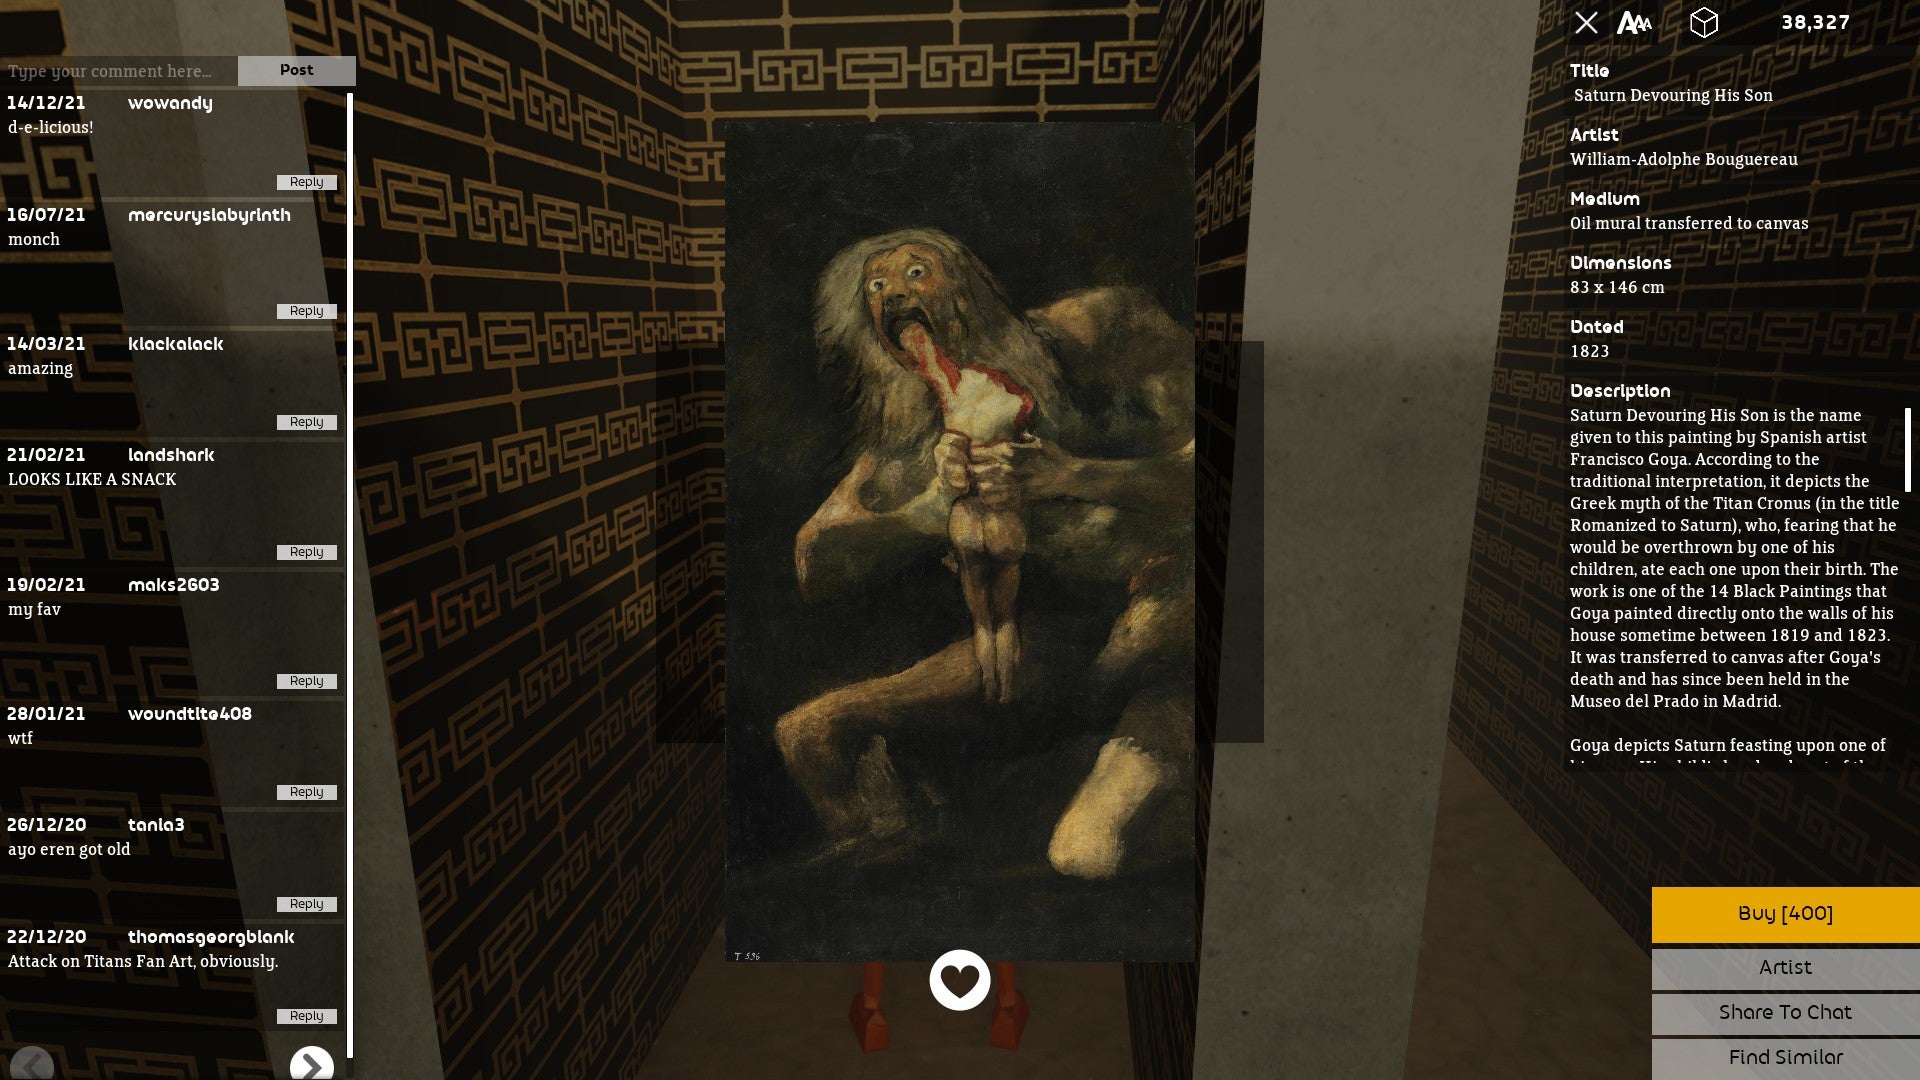 A painting of a titan eating a human.  His mouth is open and his eyes are wide